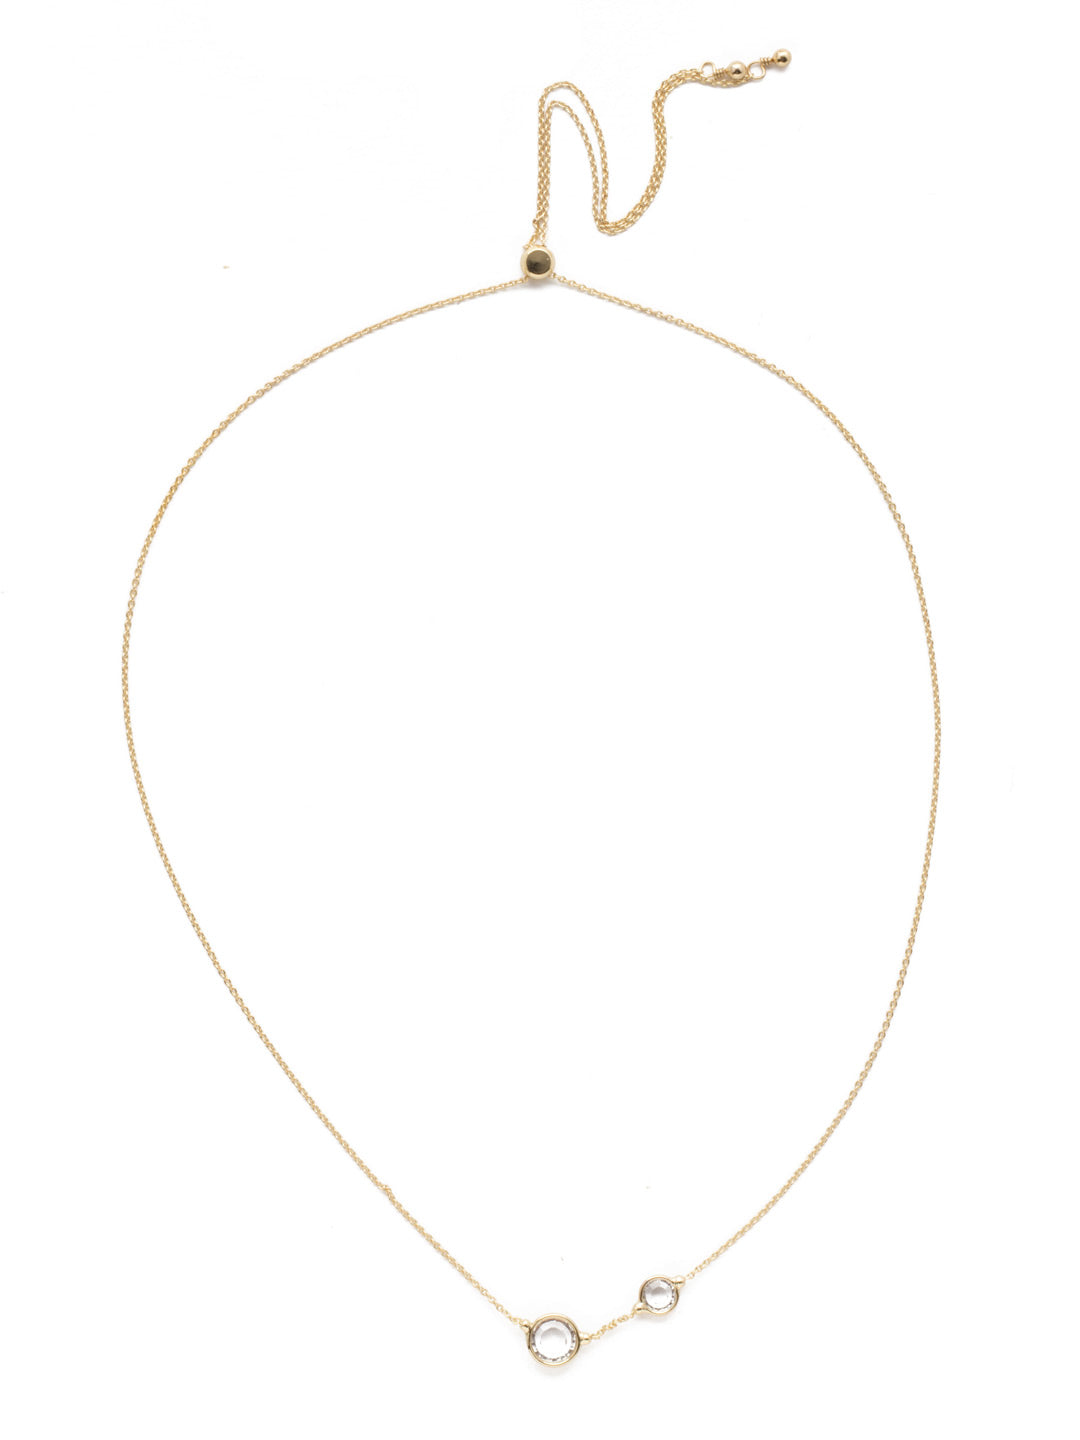 Crystal Revolution Pendant Necklace - 4NEK30BGCRY - <p>A pair of crystal drops dotted on a dainty metallic band show off your softer side with this pendant. From Sorrelli's Crystal collection in our Bright Gold-tone finish.</p>